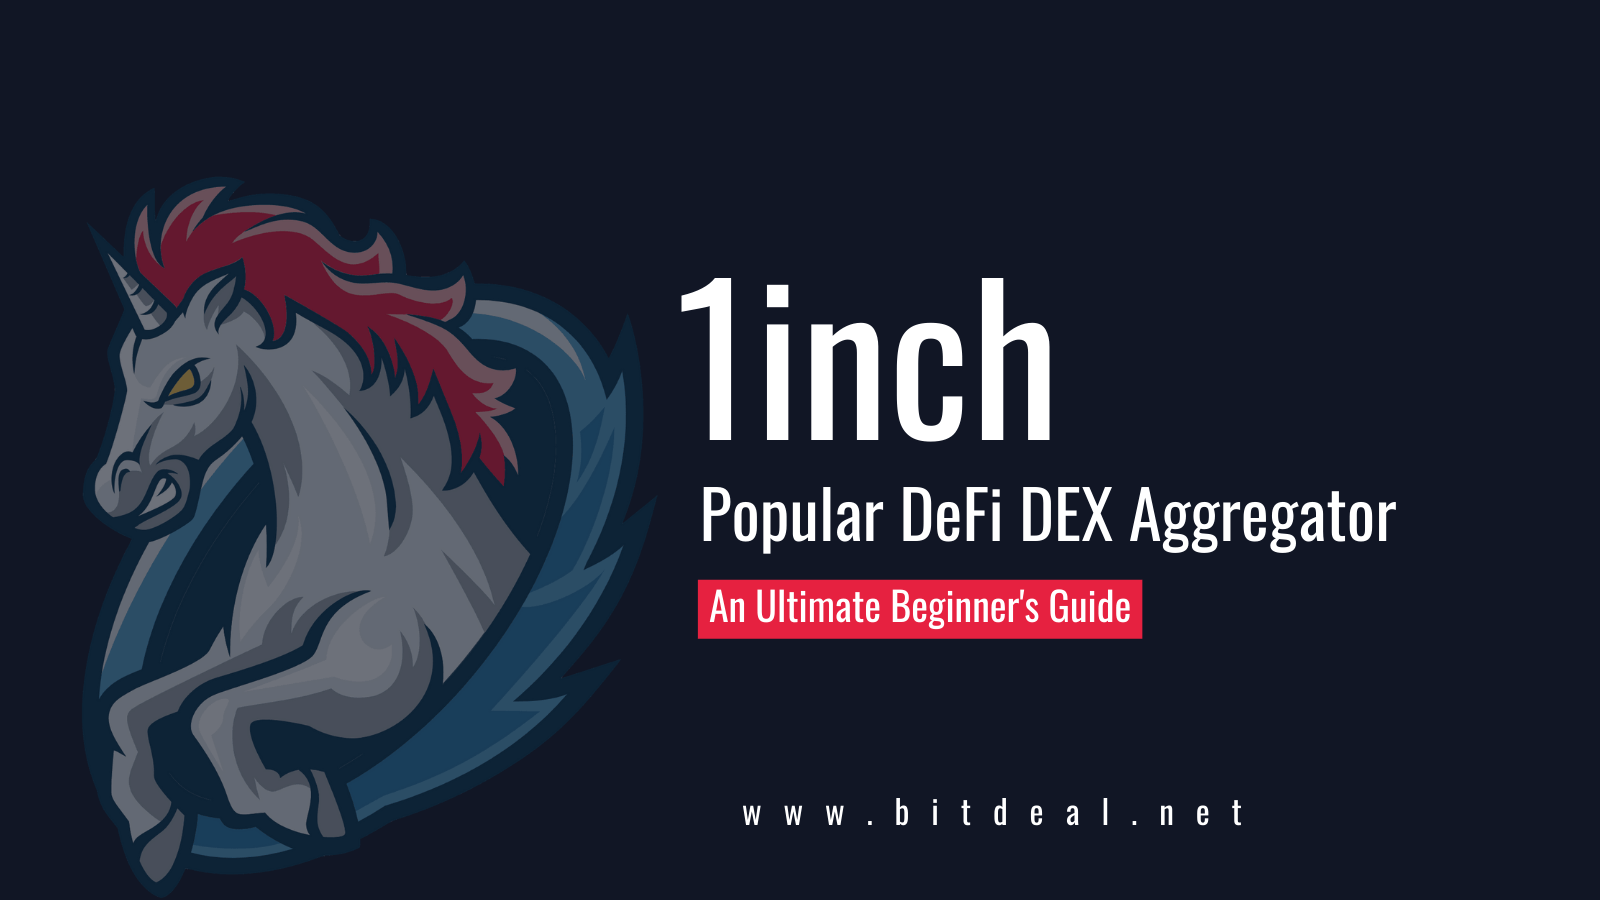 A Complete Guide to 1inch - A Popular DeFi DEX Exchange Aggregator